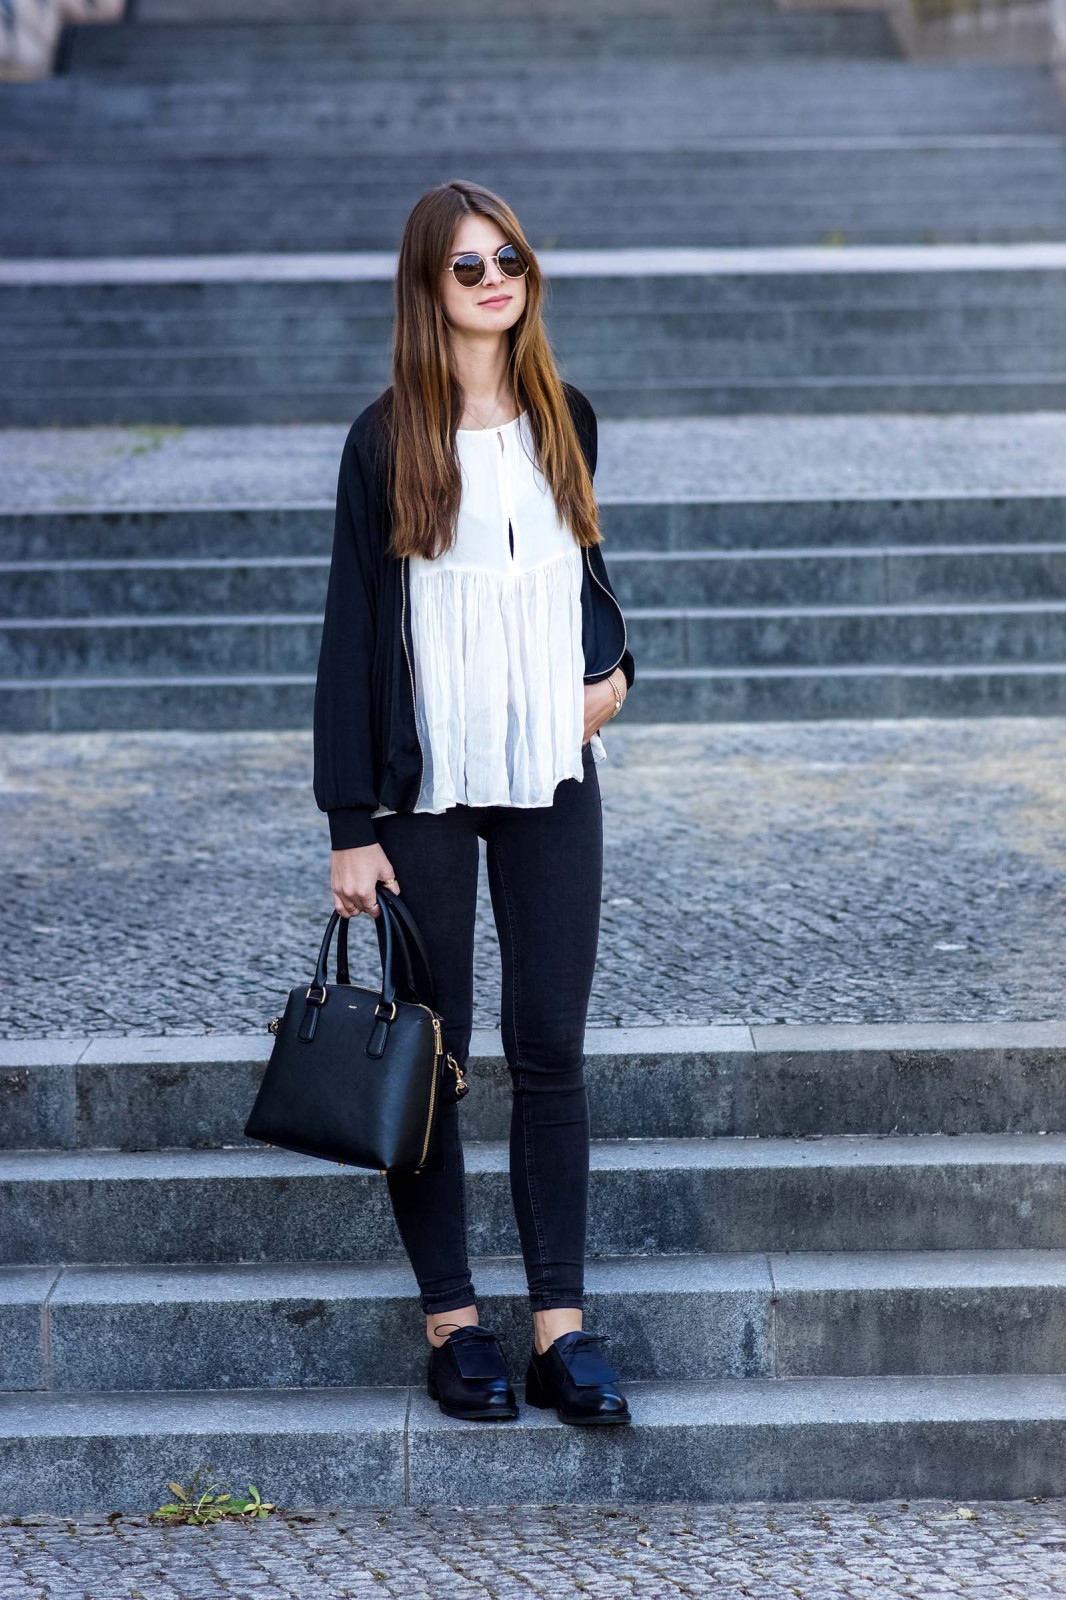 Casual yet chic outfit